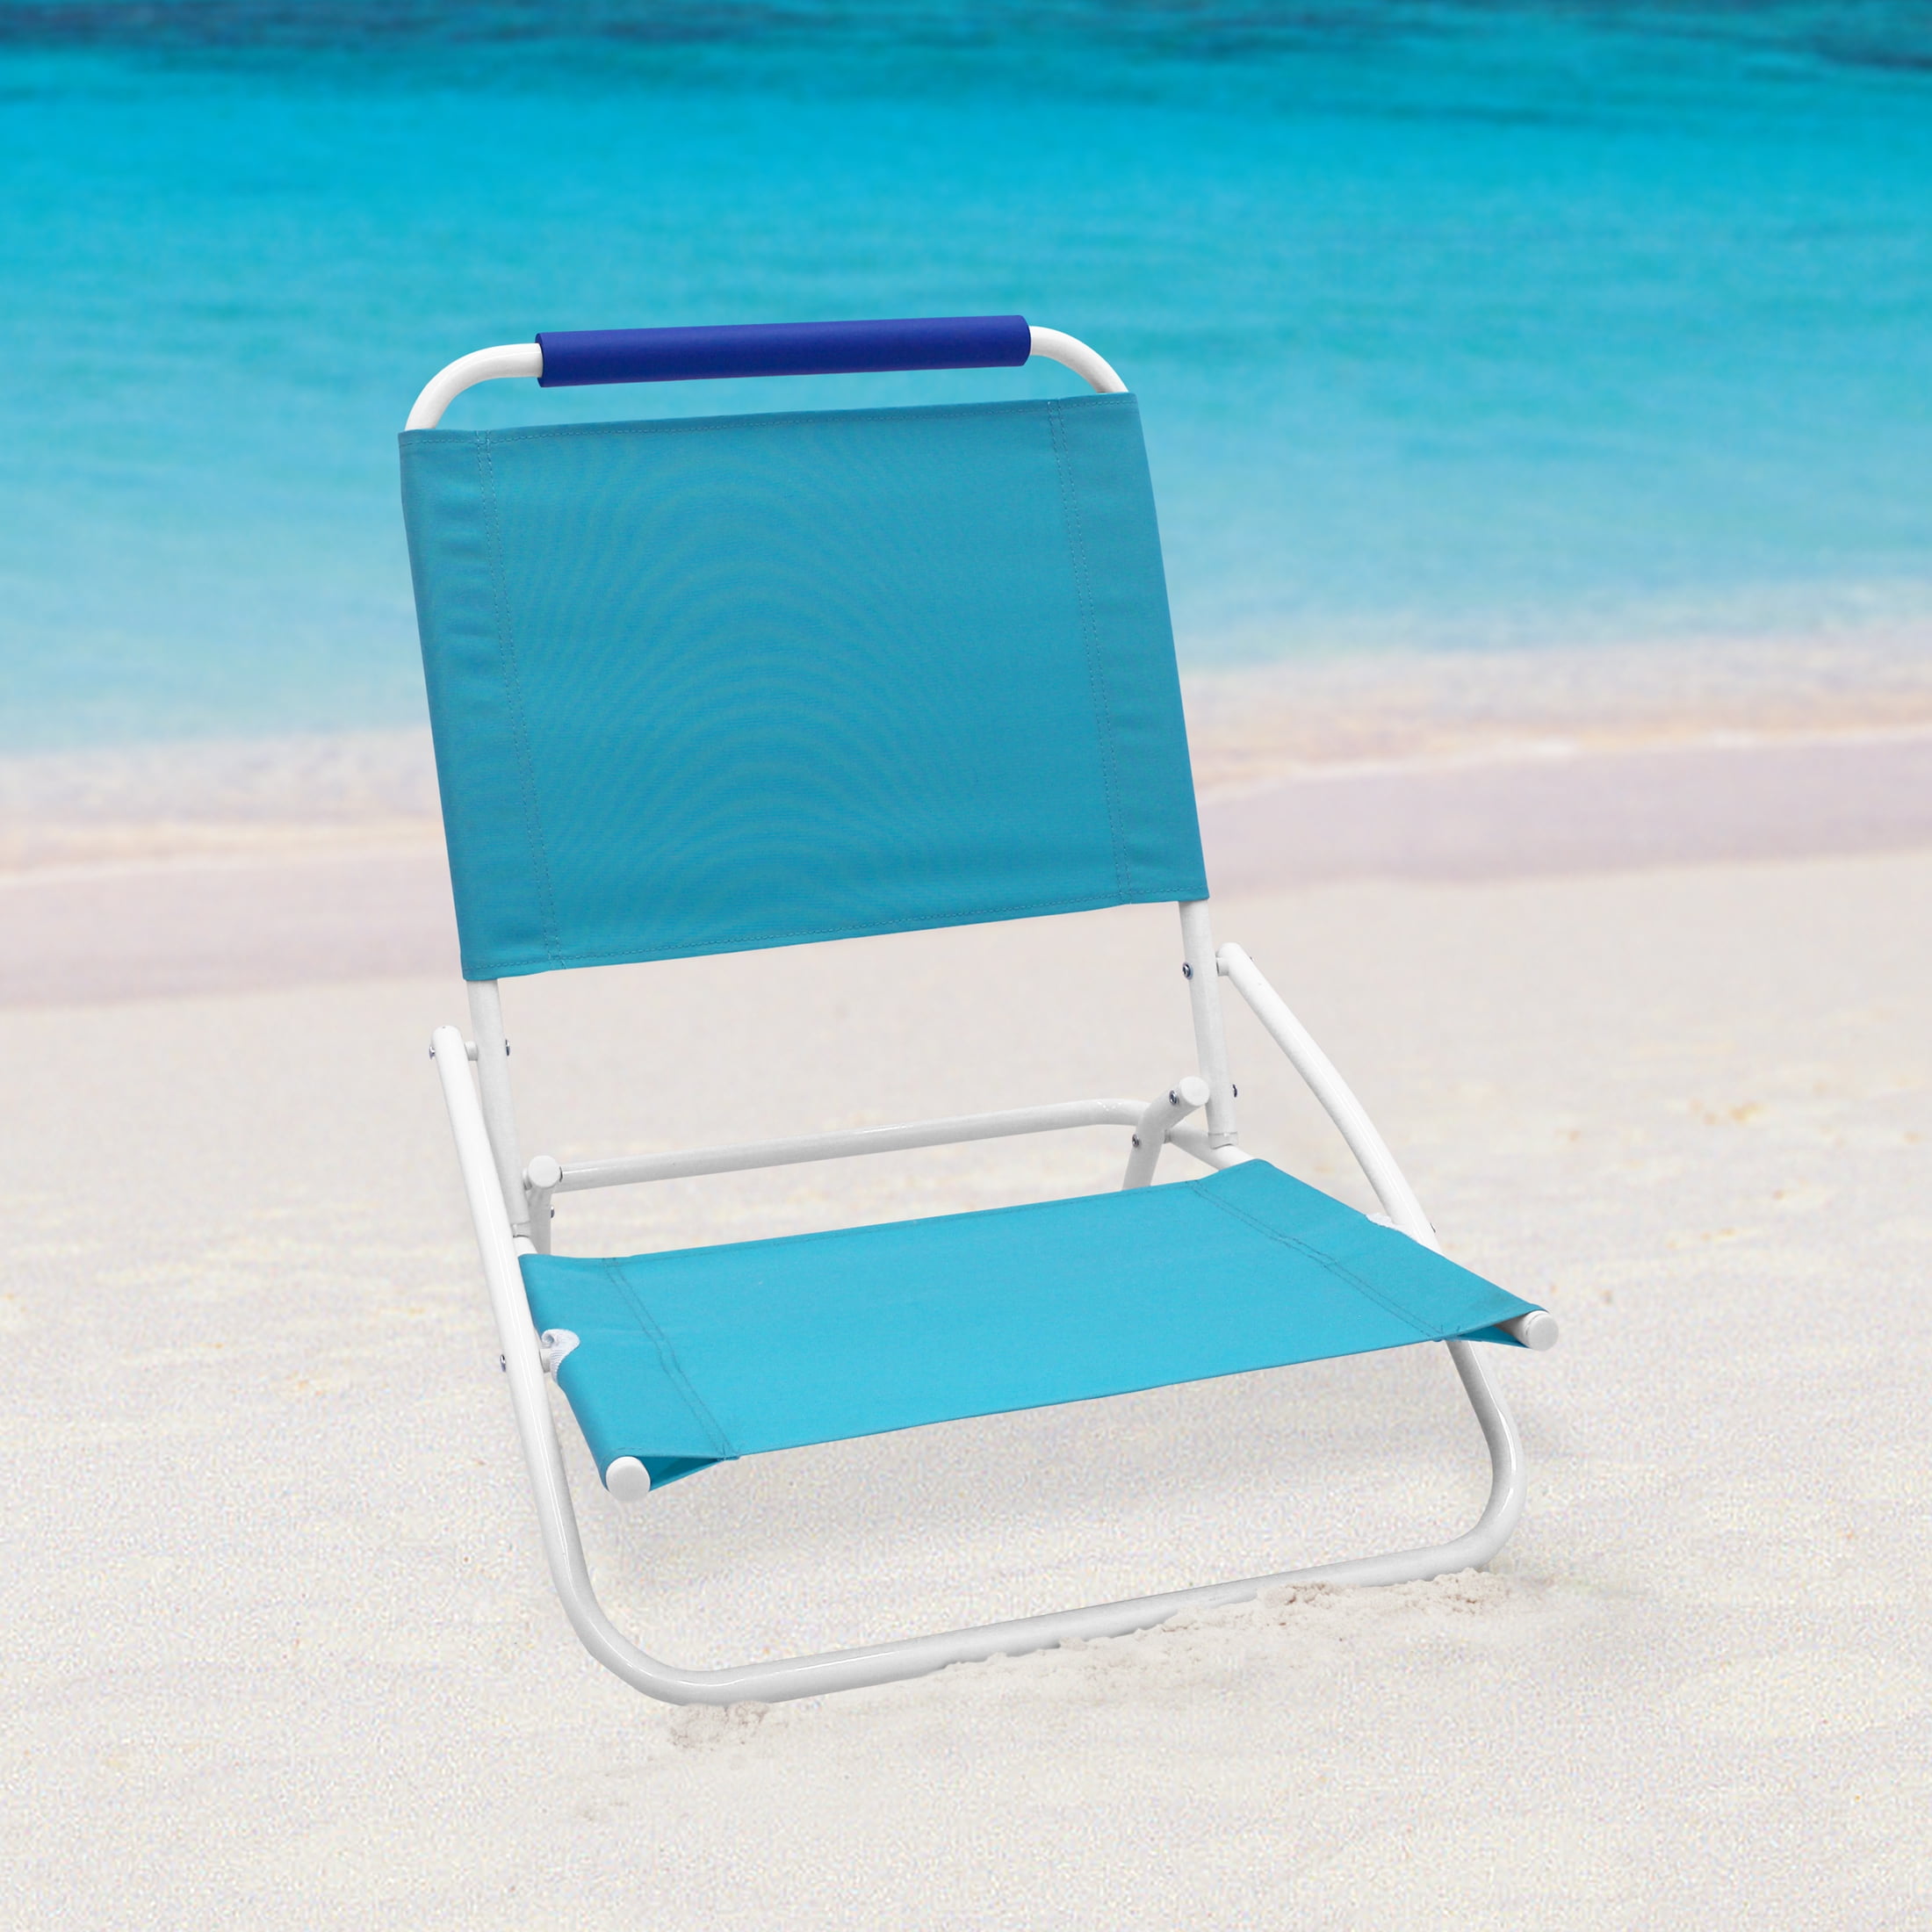 Copa Beach Anchor New Improved Design Teal FREE SHIPPING NEW